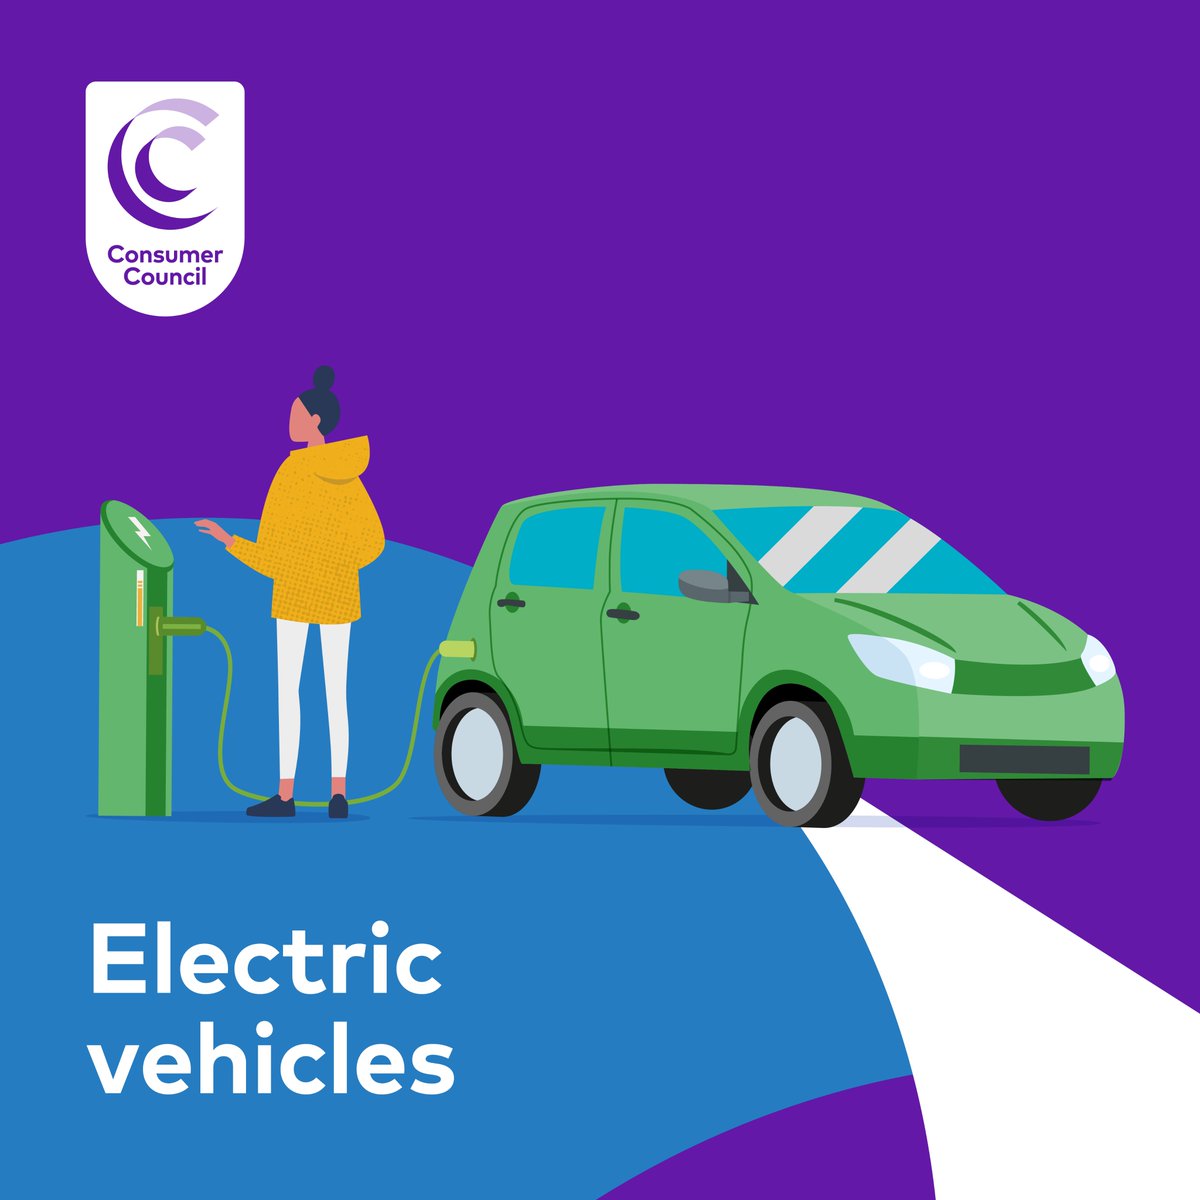 Do you drive a plug-in #electricvehicle? Are you considering swapping to an electric vehicle in the next 12 months? We want to hear from you, particularly in relation to the public #EV charging infrastructure in #NorthernIreland. Complete our survey - bit.ly/EV_CC_survey